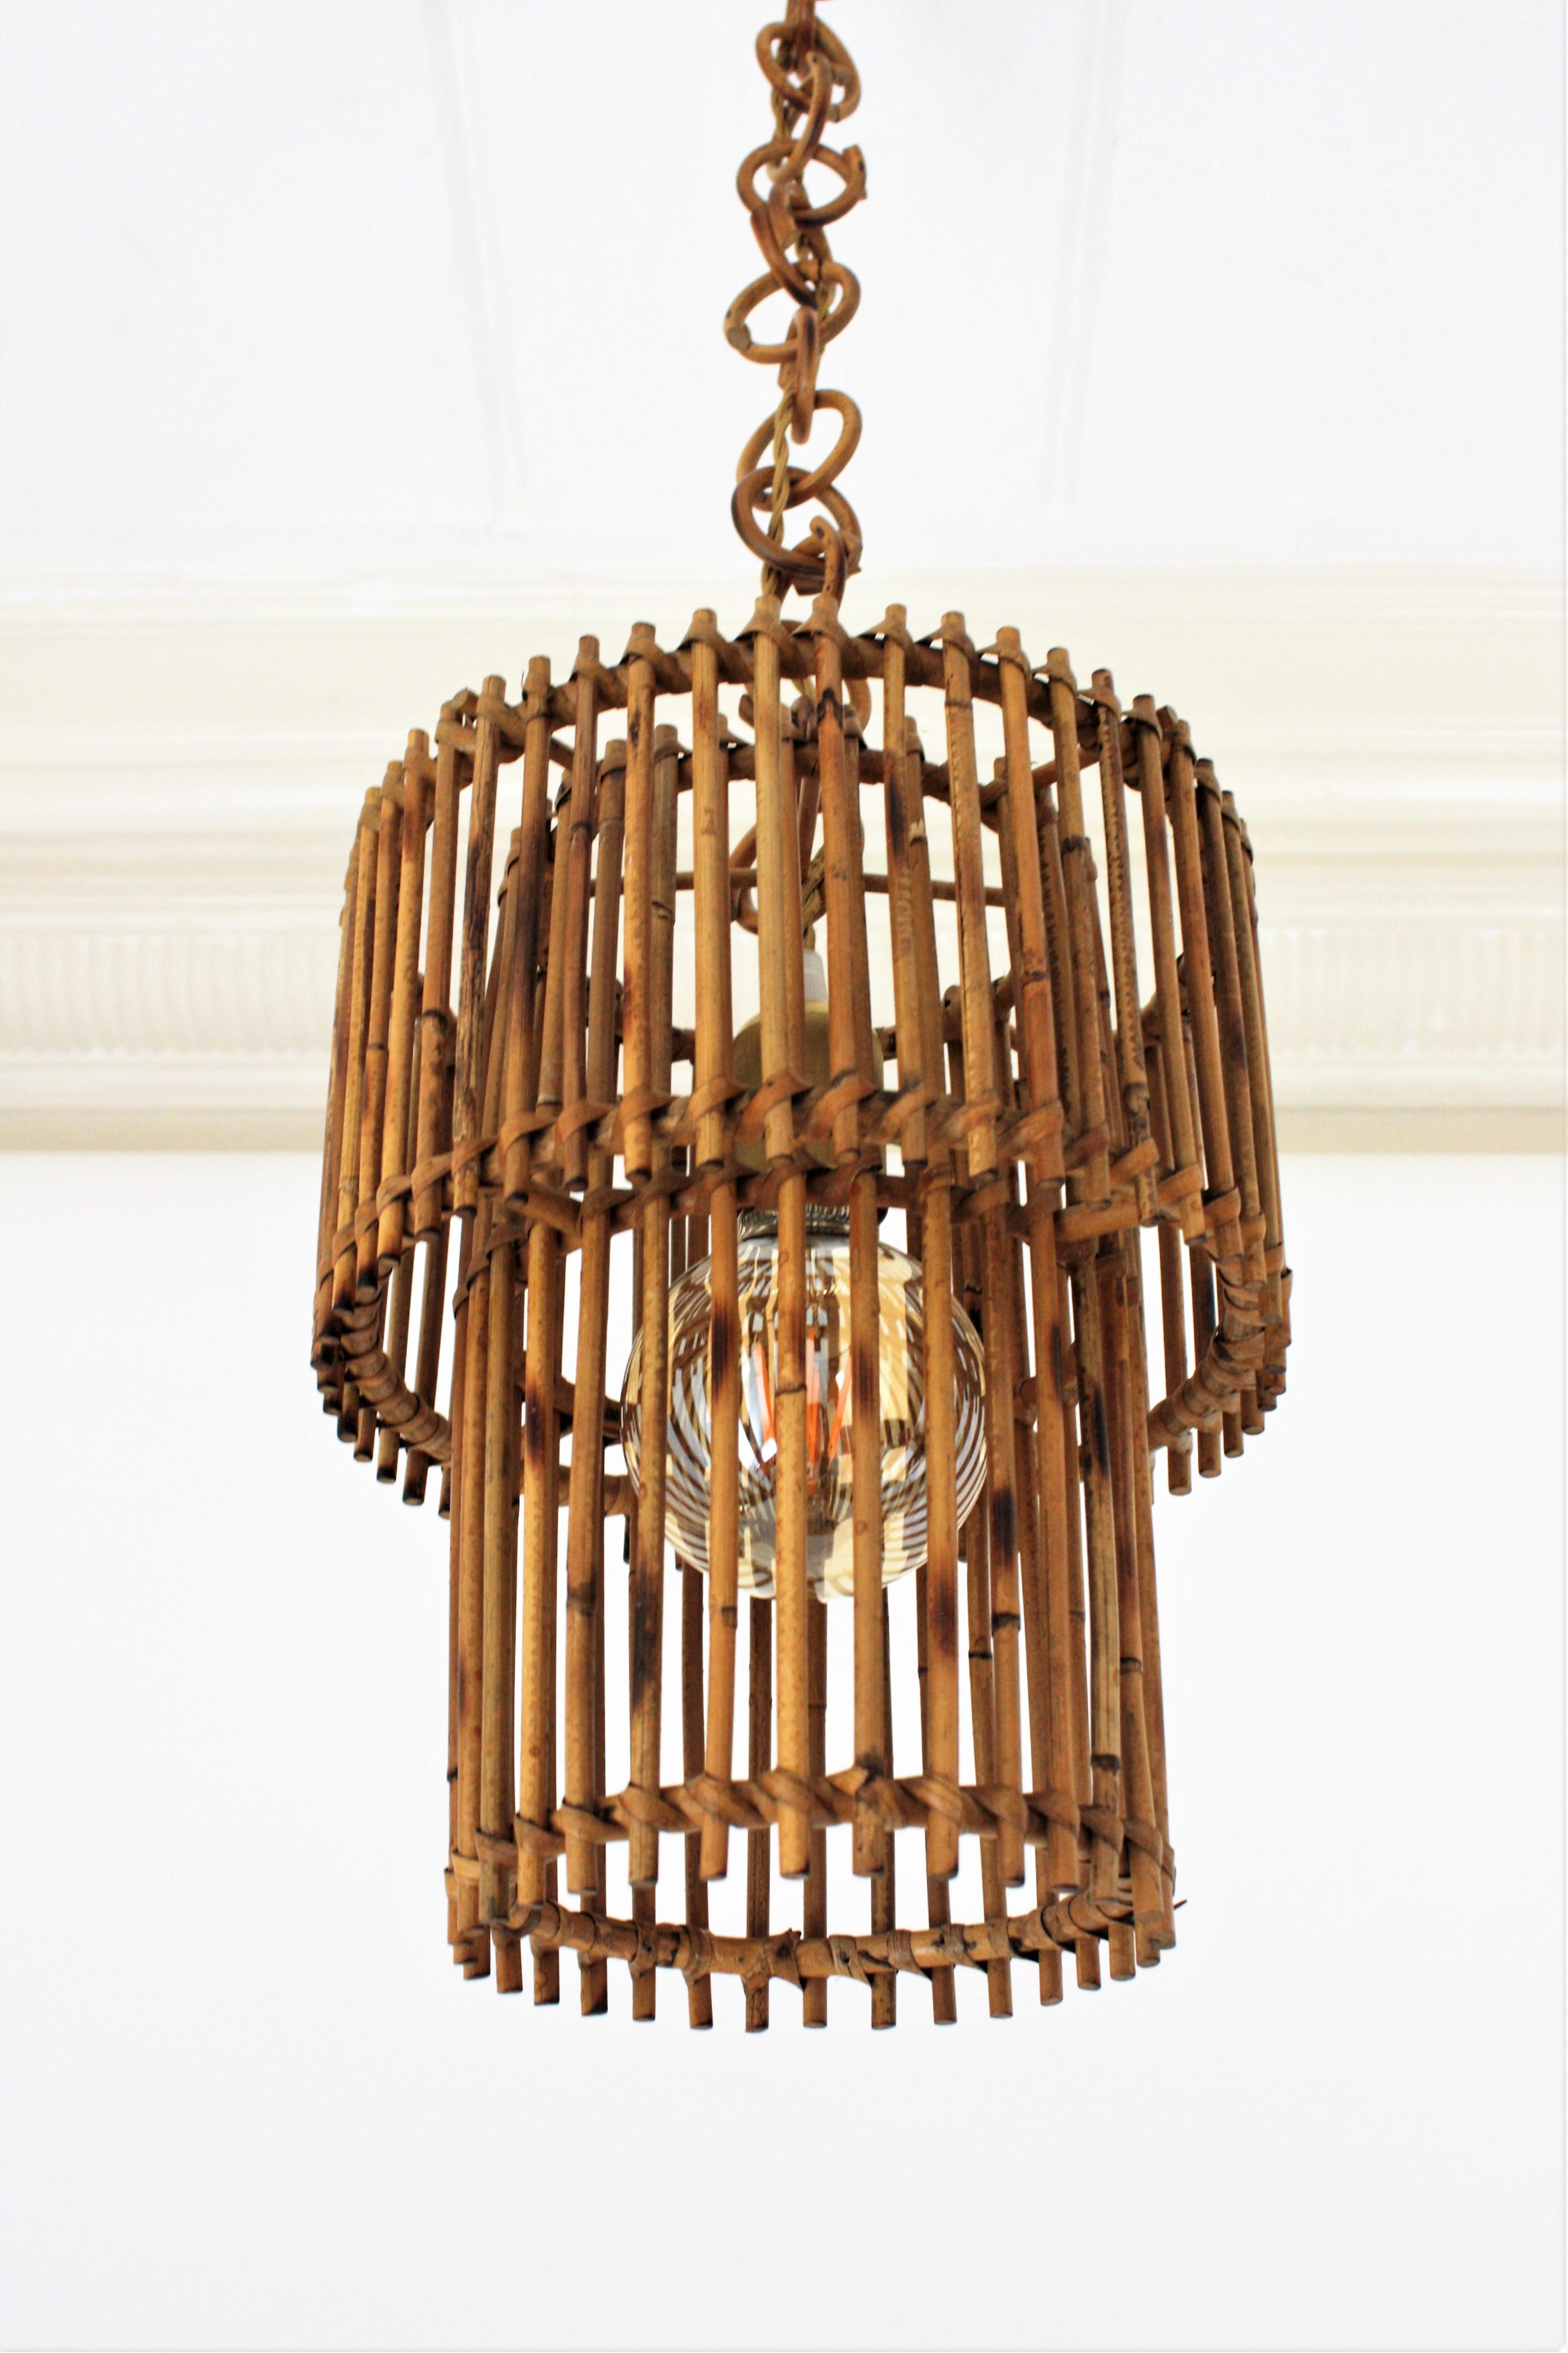 Eye-catching Mid-Century Modern cylinder rattan lantern or pendant ceiling lamp, Italy, 1960s.
This oriental inspired suspension features two concentric cylinders made of rattan or wicker canes. The outer cylindrical shade is 25 cm diameter and the